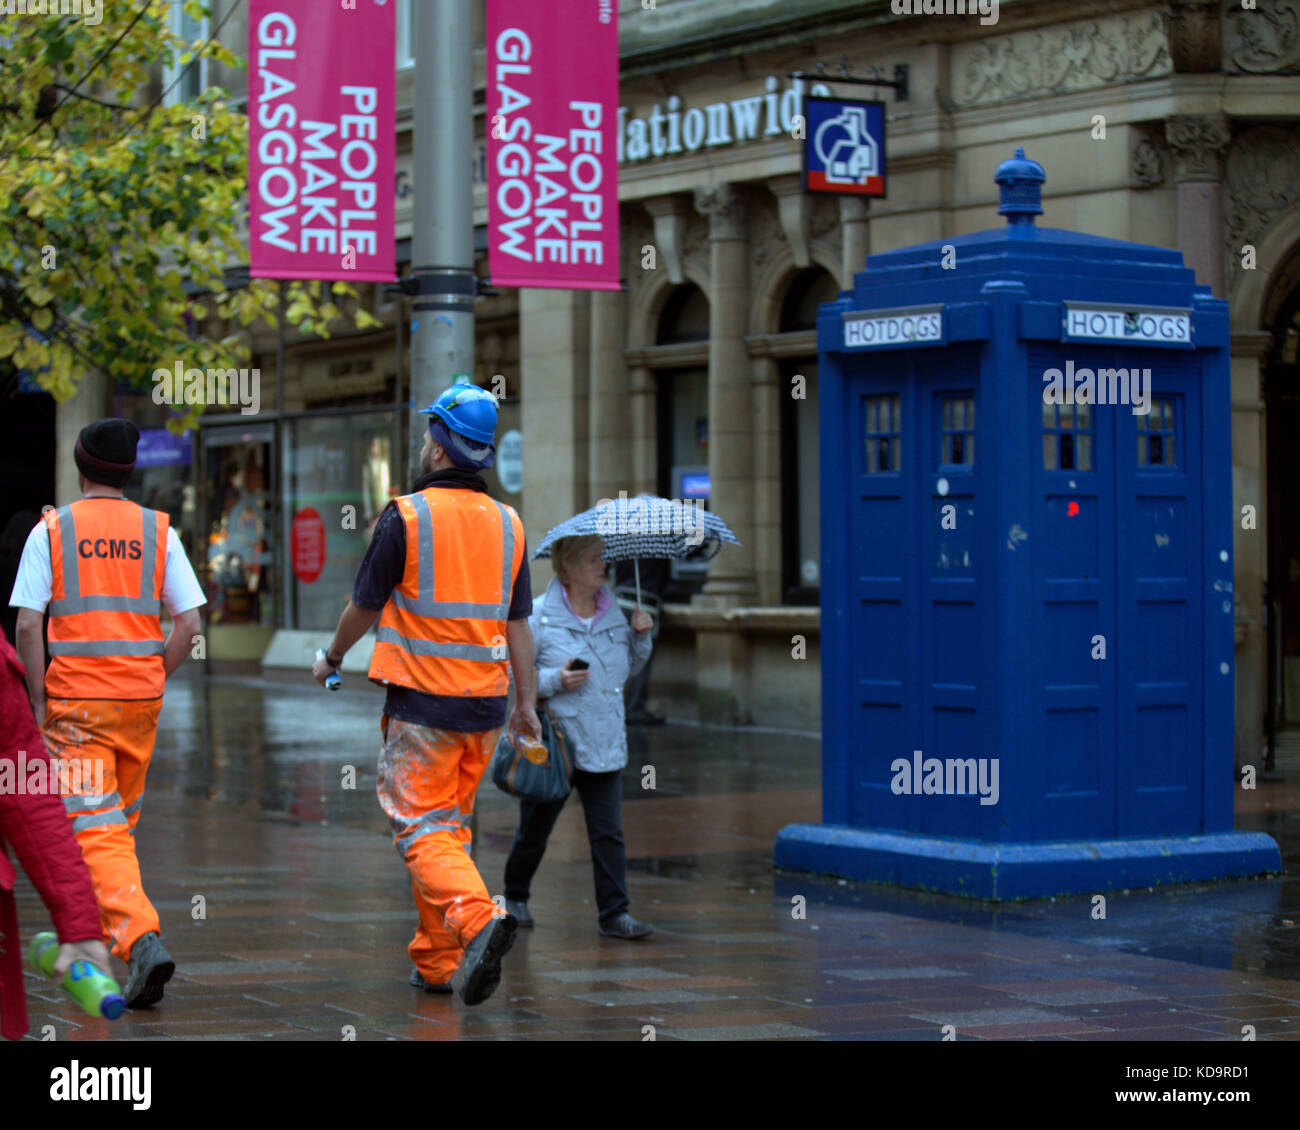 Glasgow, Scotland, UK.11th October. UK Weather The awful summer weather continues into autumn as Heavy showers and strong winds batter the city near the dr who tardis style phone box statue on Buchanan Street. Credit Gerard Ferry/Alamy news Stock Photo